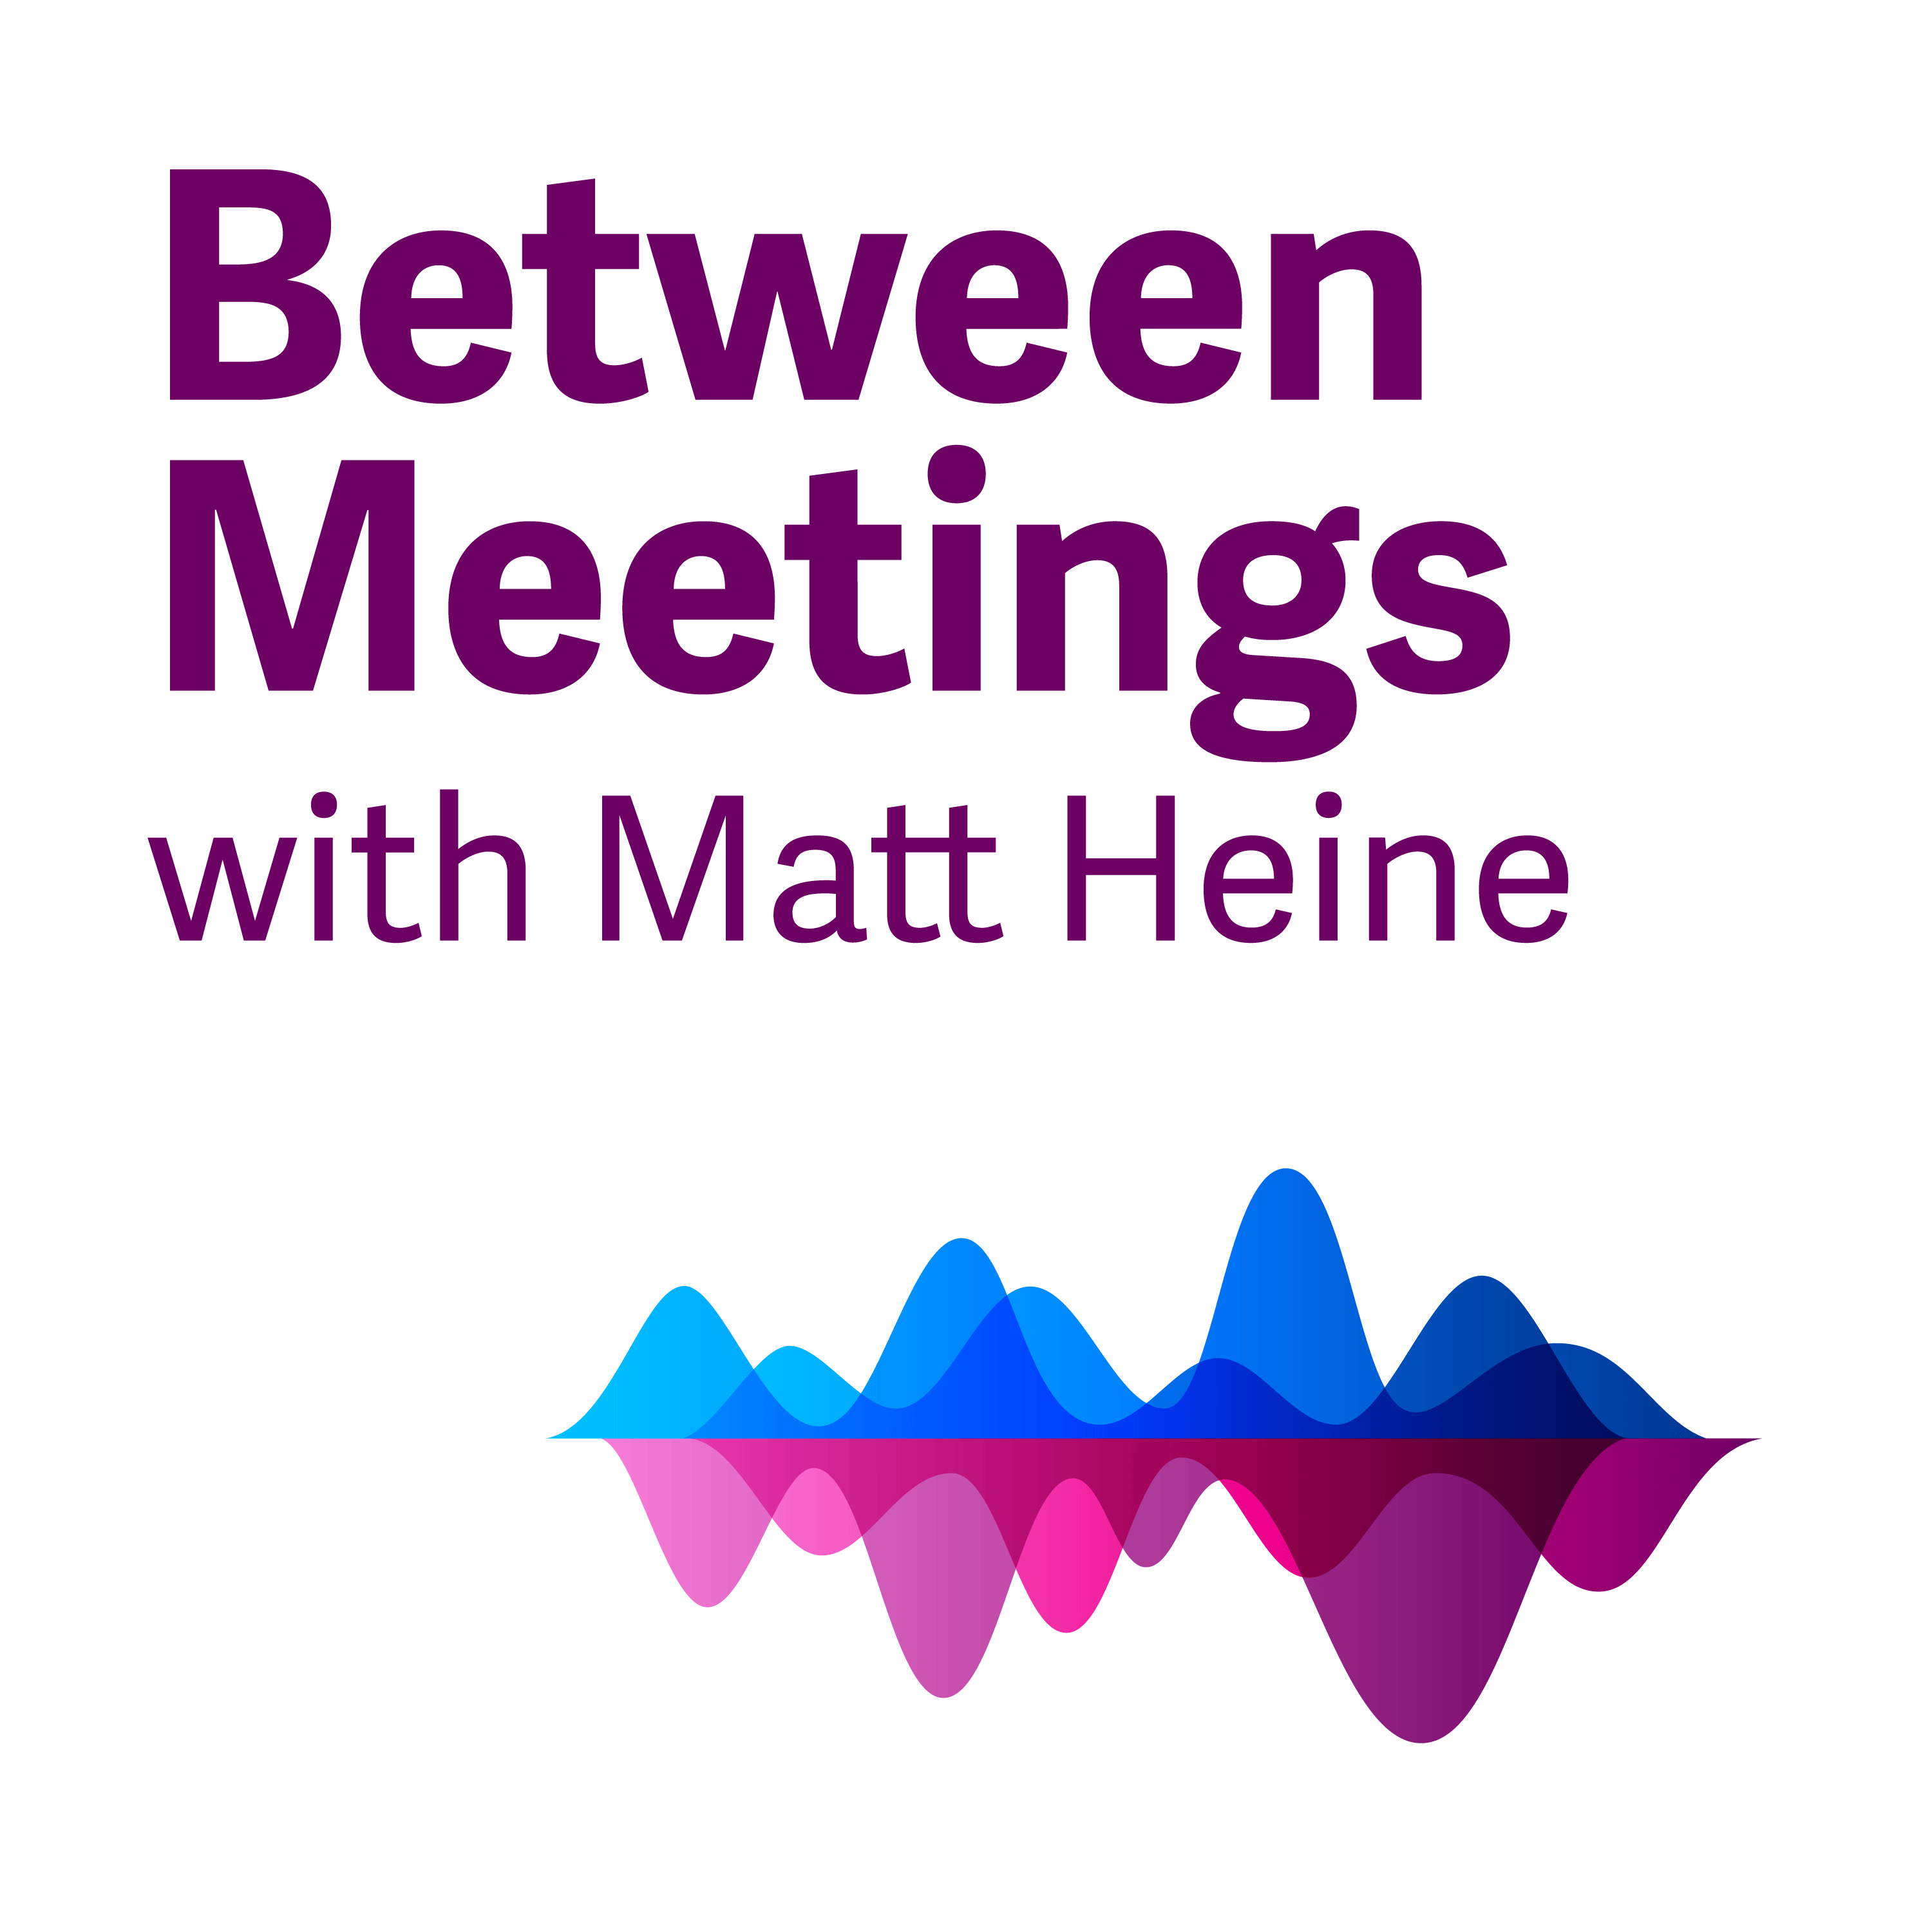 Listen to more Between Meetings podcasts